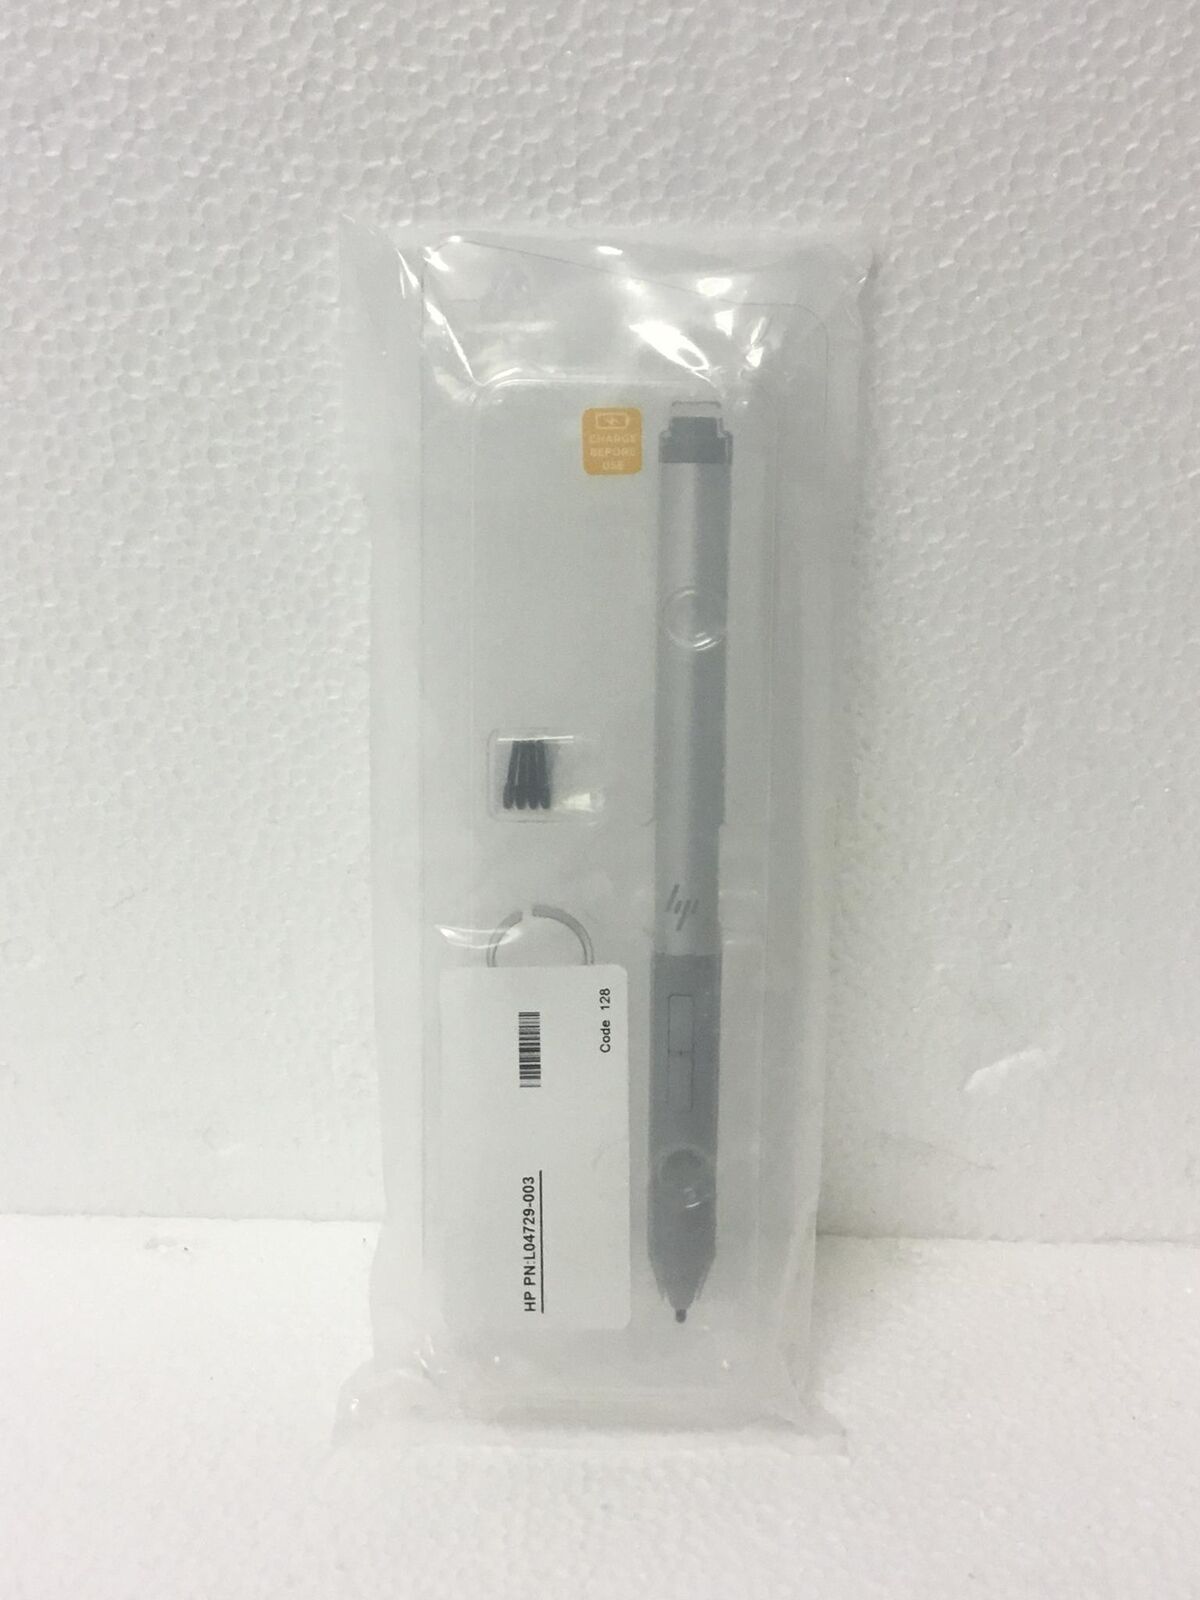 NEW Sealed HP Rechargeable Pen G3 (HP P/N L04729-003) with Charge Cable, QTY